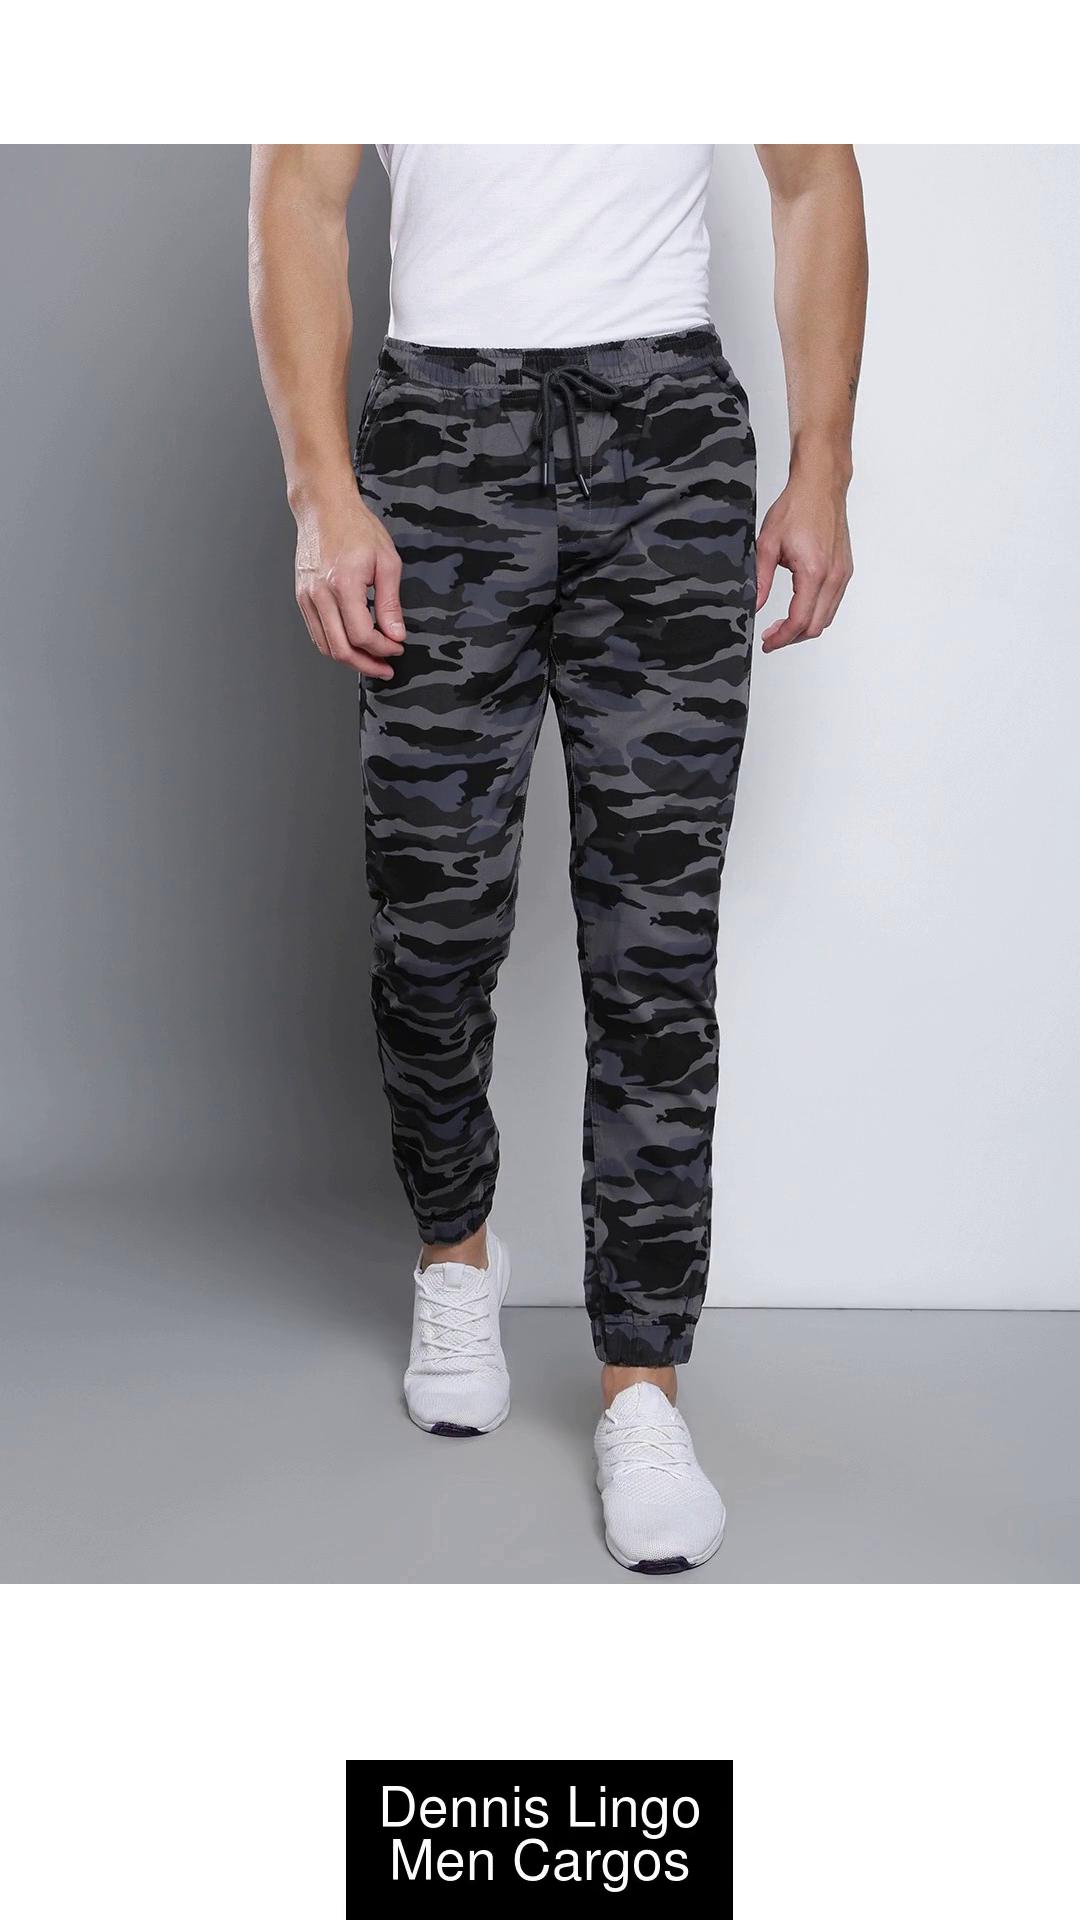 mens span cargo pants military black camouflage